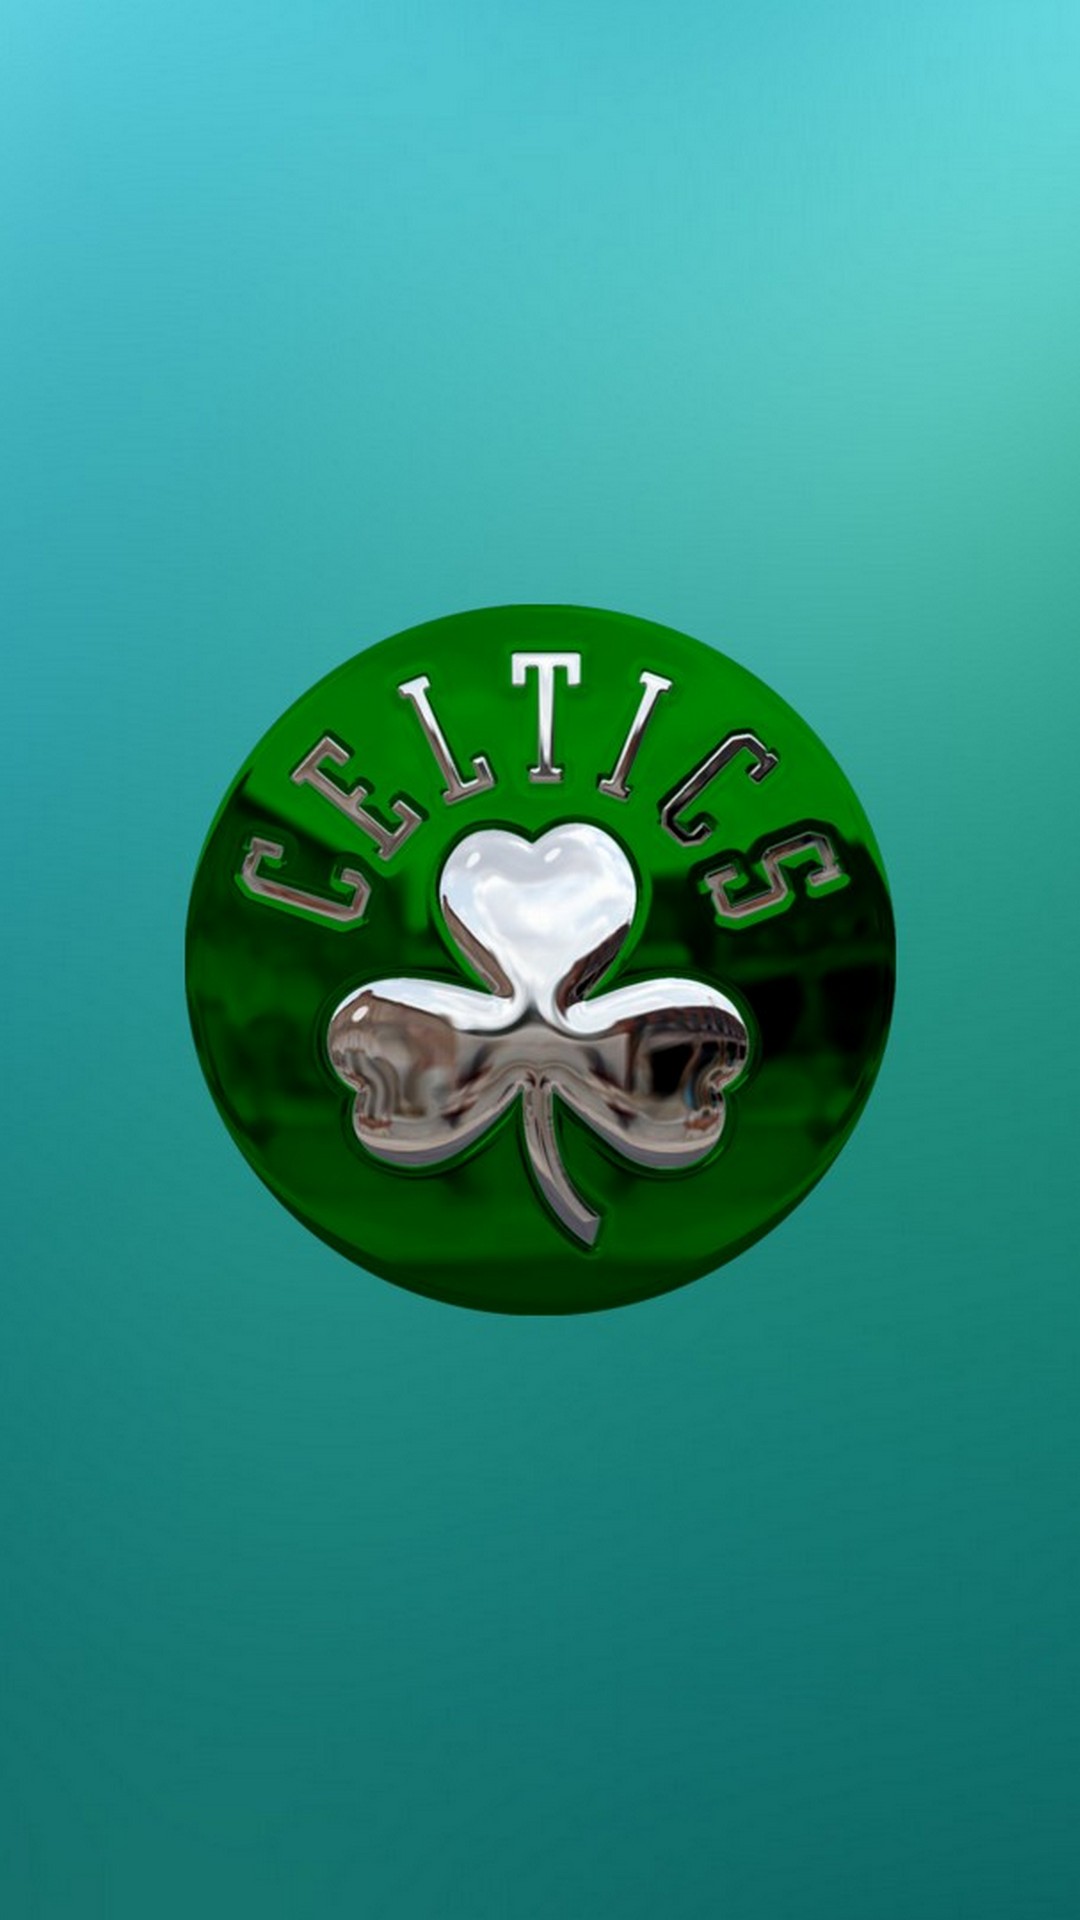 Boston Celtics Logo iPhone Wallpaper with image resolution 1080x1920 pixel. You can make this wallpaper for your iPhone 5, 6, 7, 8, X backgrounds, Mobile Screensaver, or iPad Lock Screen